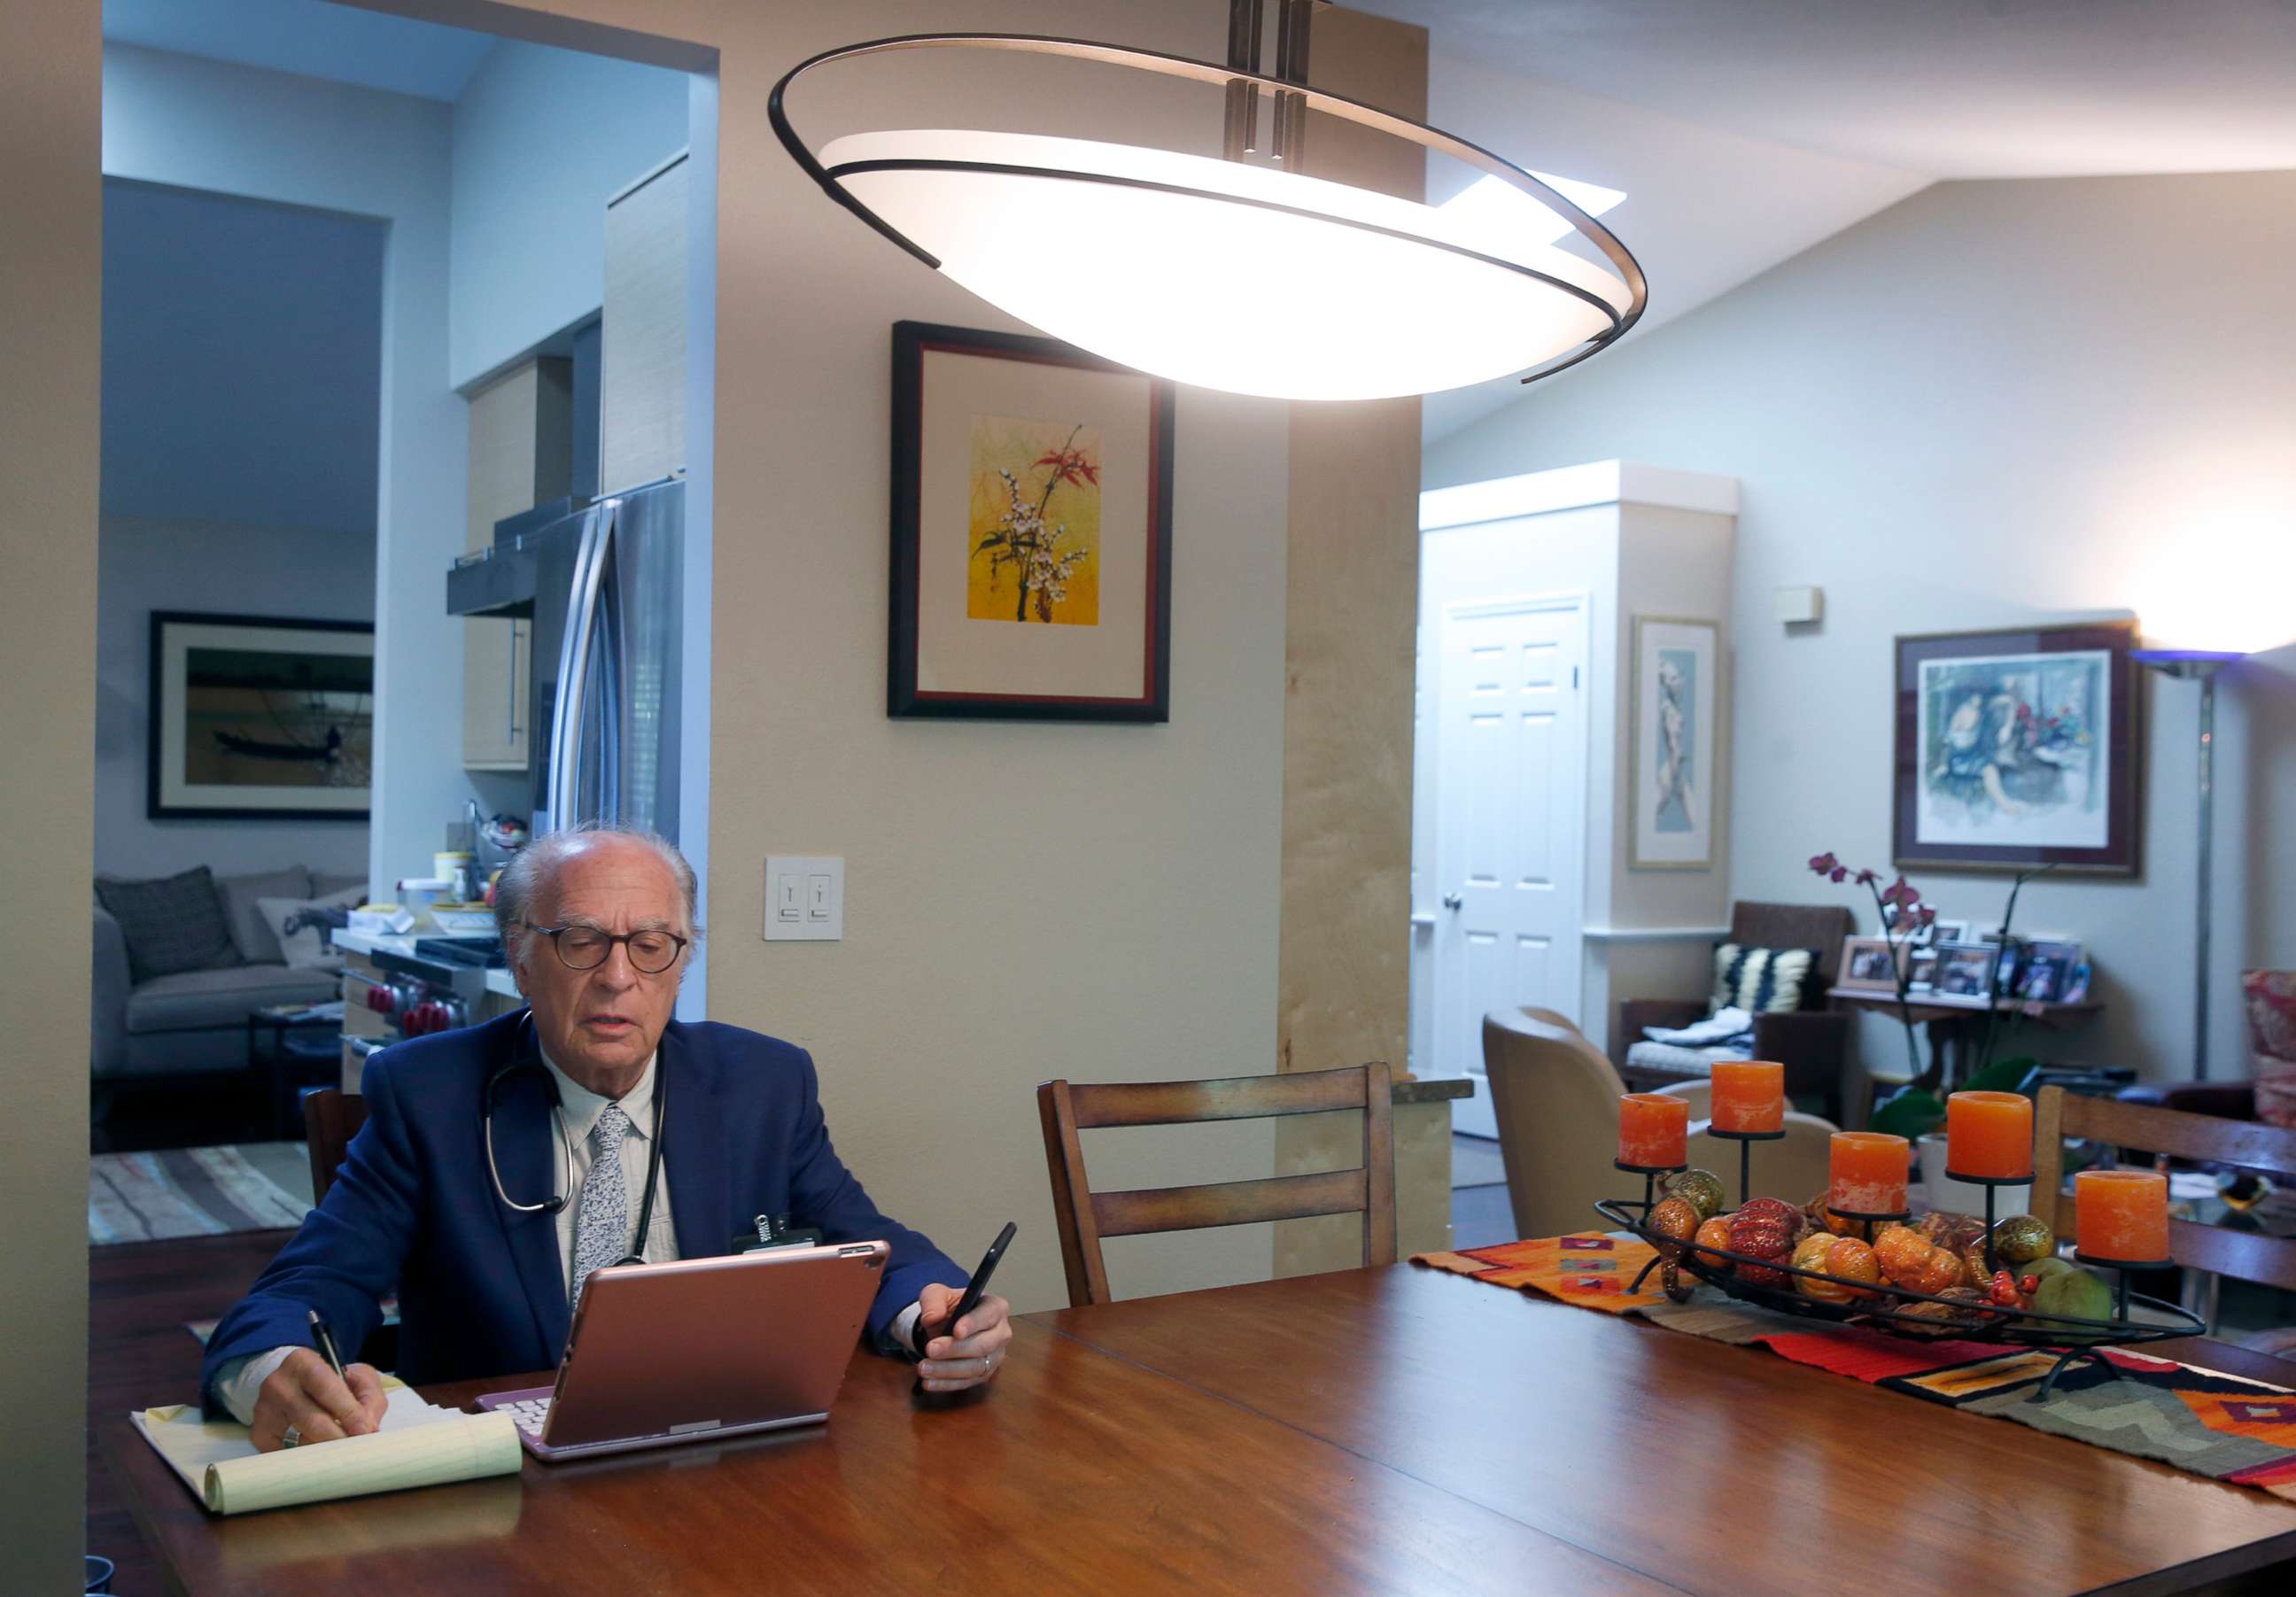 PHOTO: Dr. Neil Handelman meets with a patient remotely during a telemedicine appointment to discuss and diagnose possible coronavirus symptoms from his home in San Rafael, Calif. on March 27, 2020.